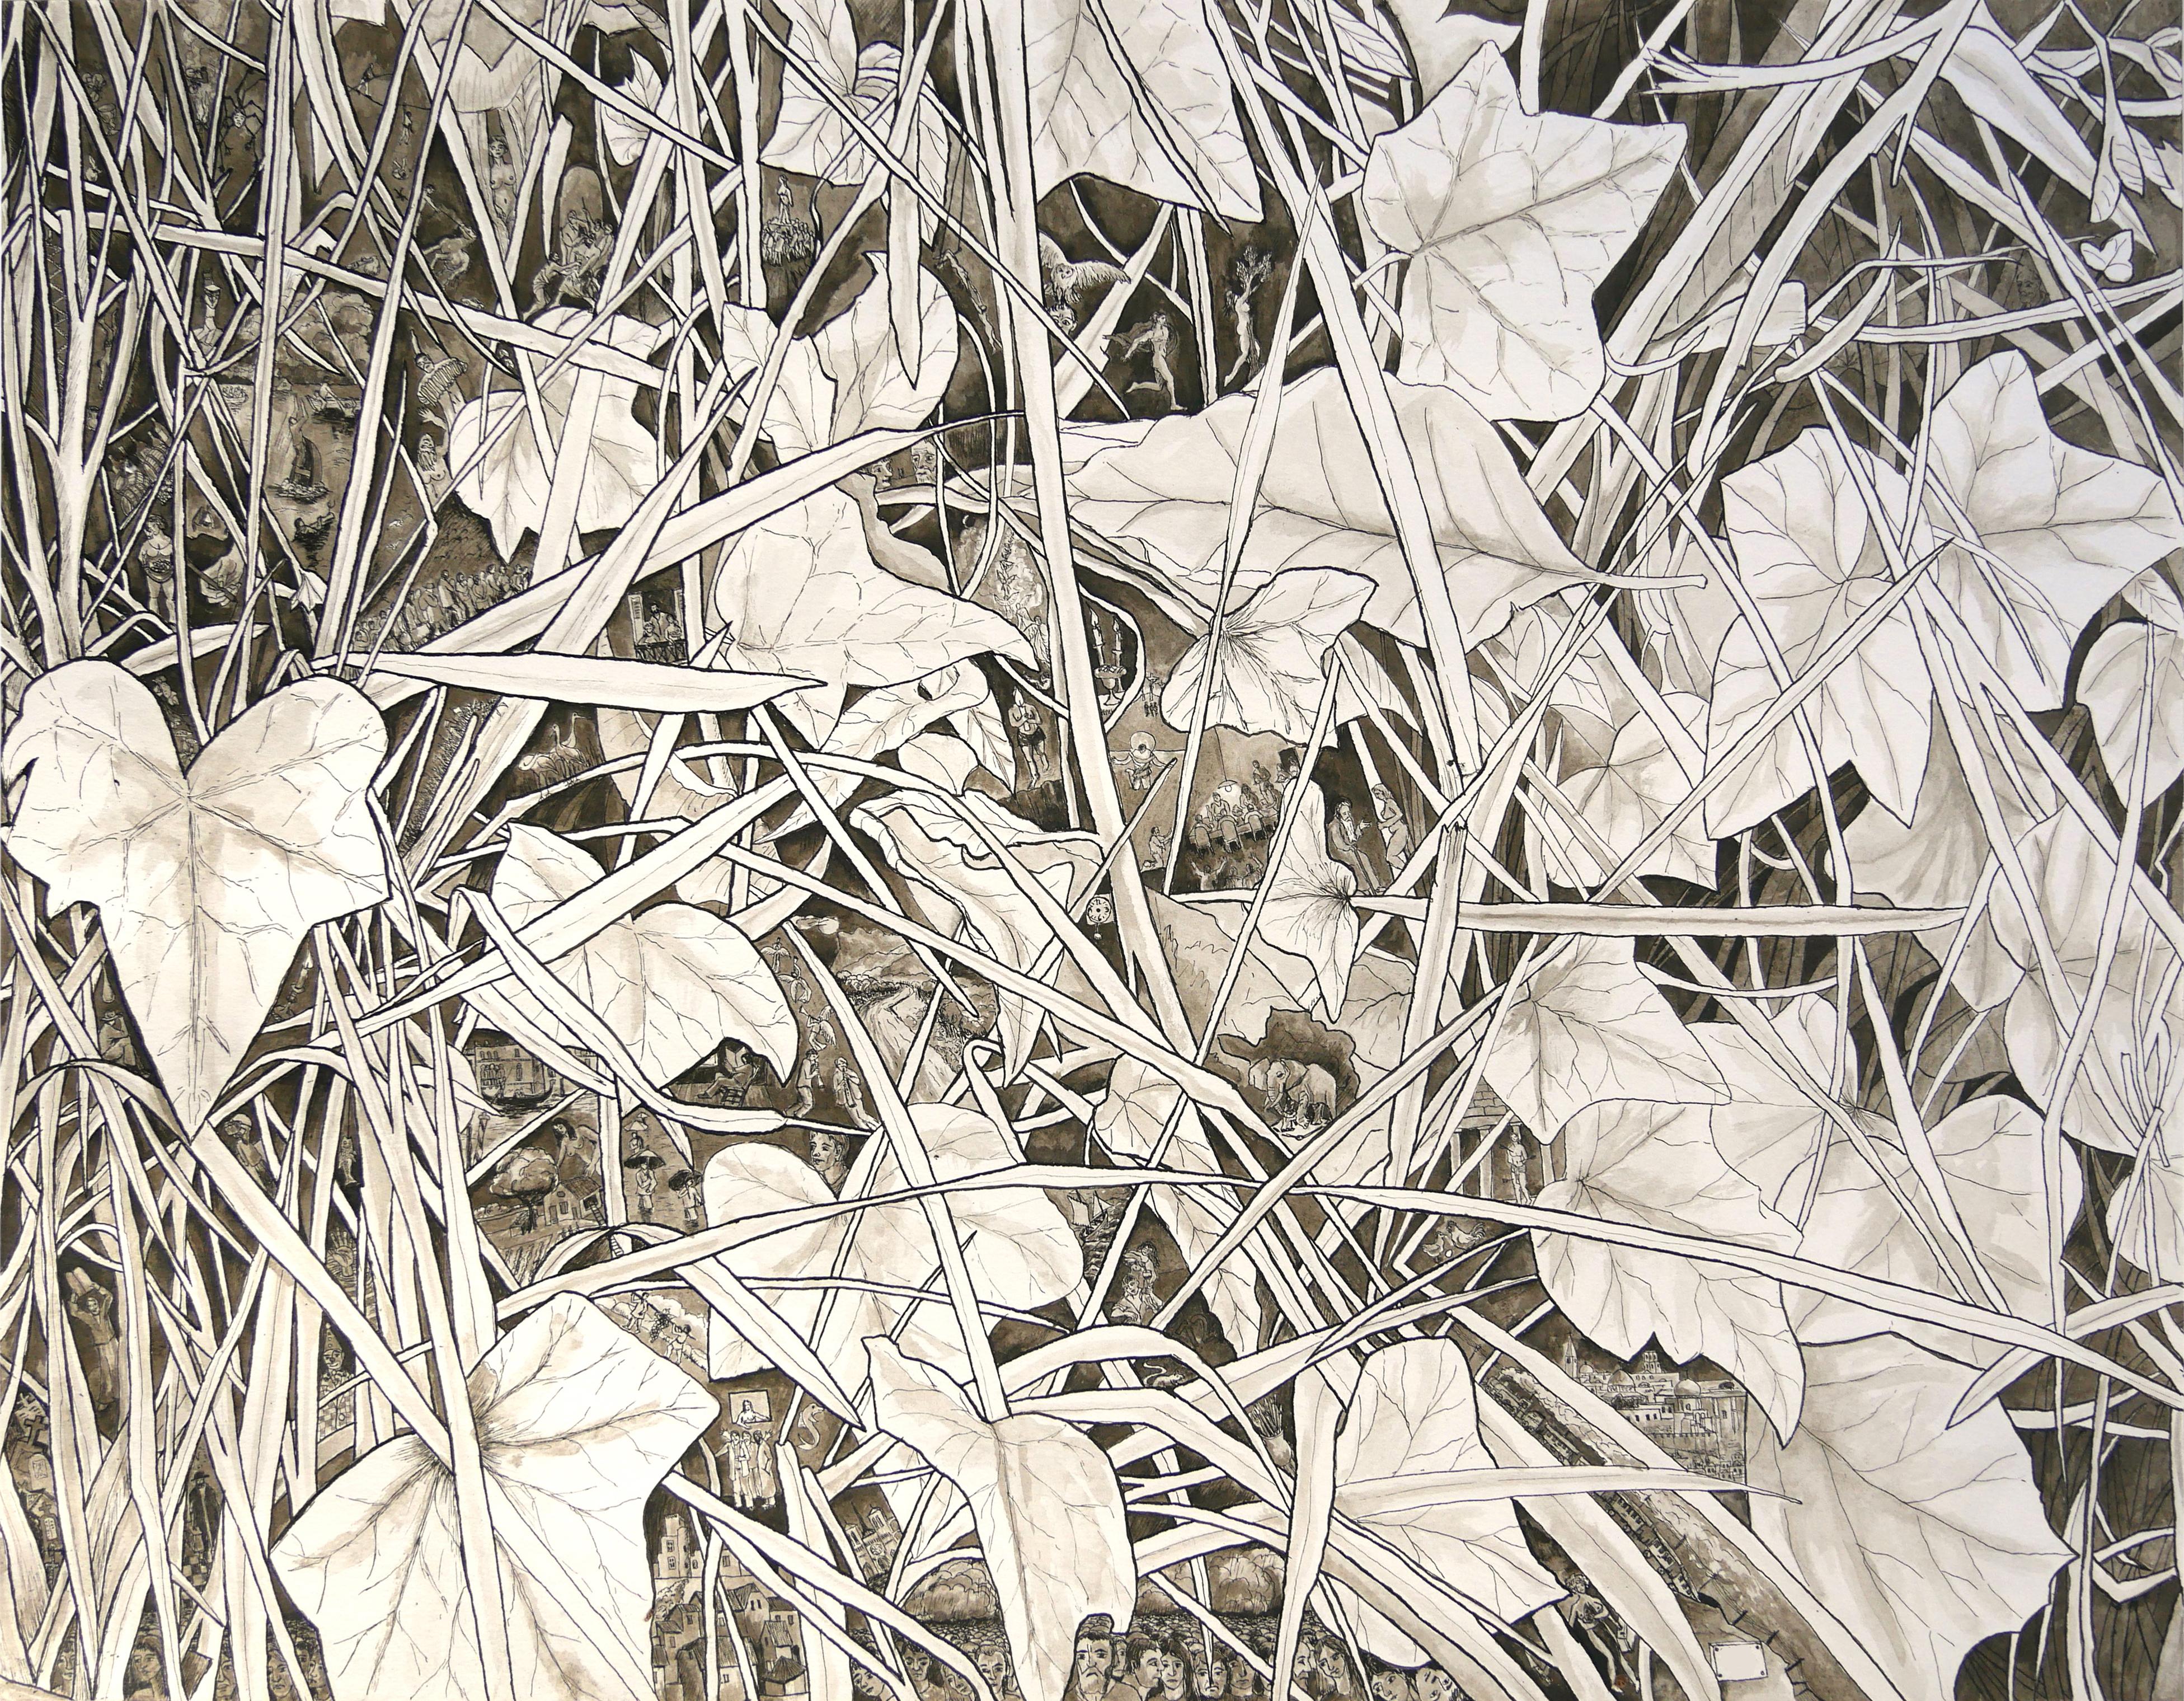 Frank Girard Landscape Art - "Edge of the Path", Grass Inhabited by Human, Chinese Ink and Wash Drawing 